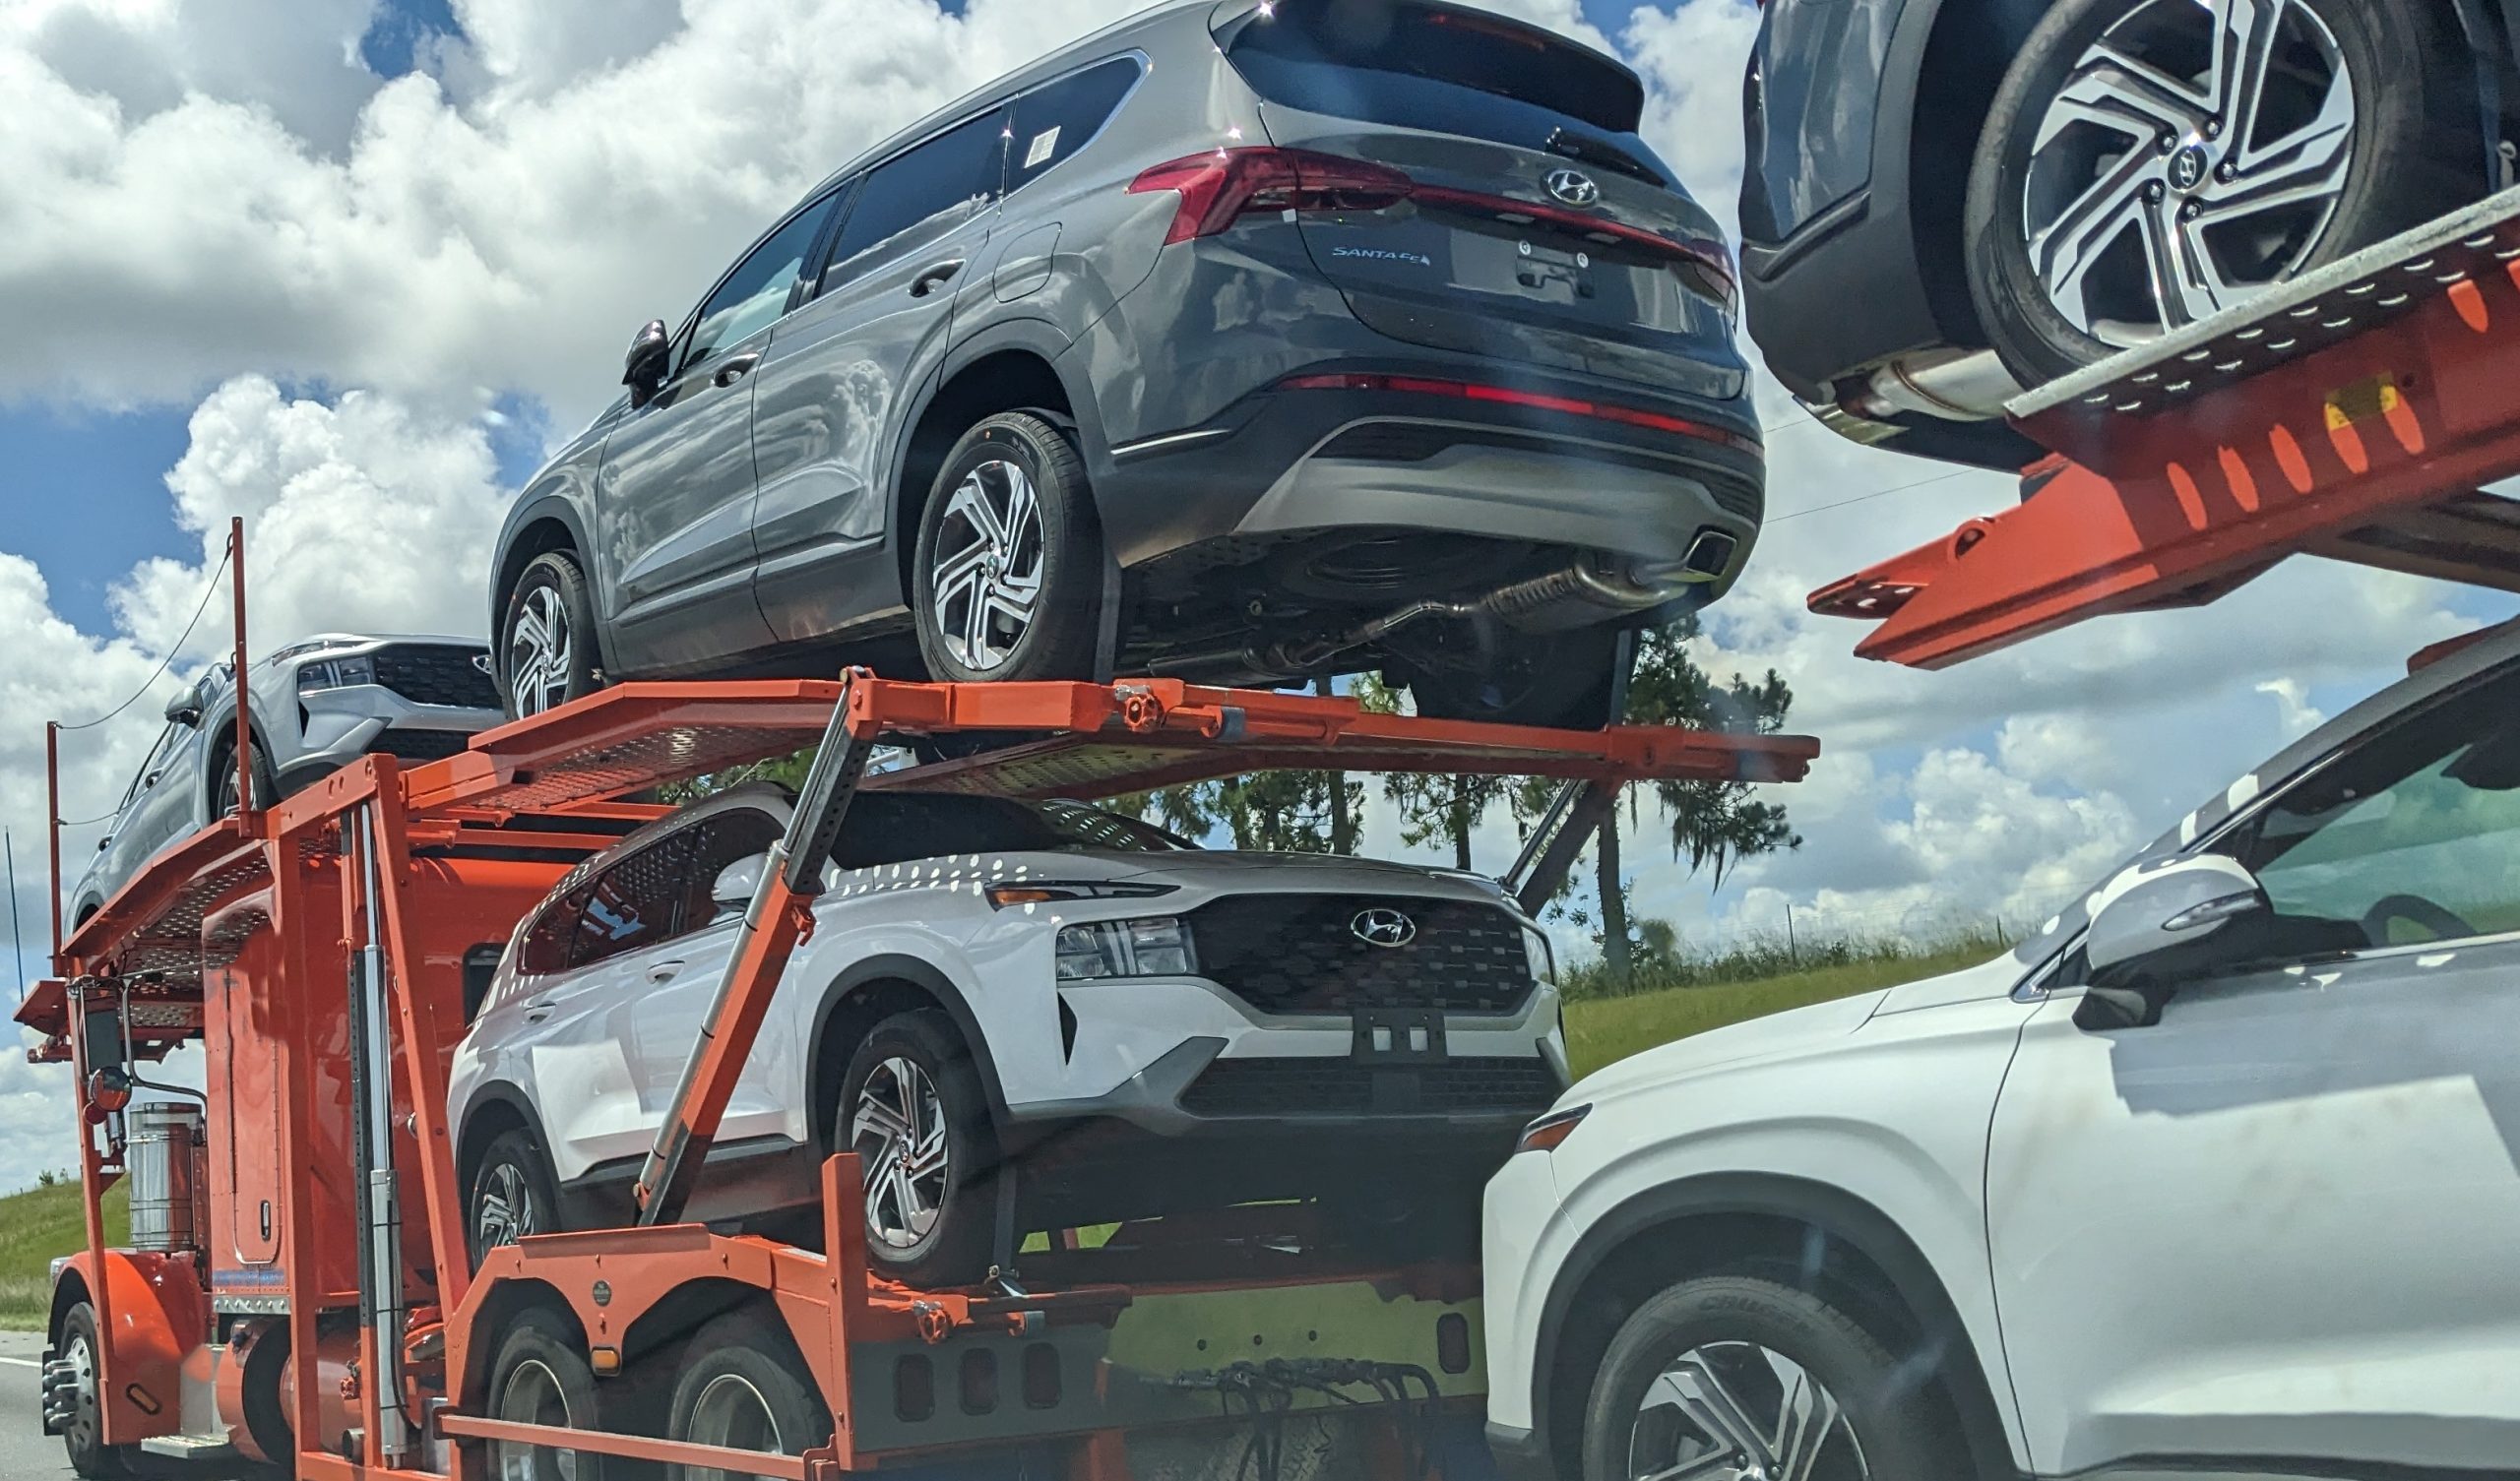 Get Auto Transport from Alberta CA to US - Transport Service